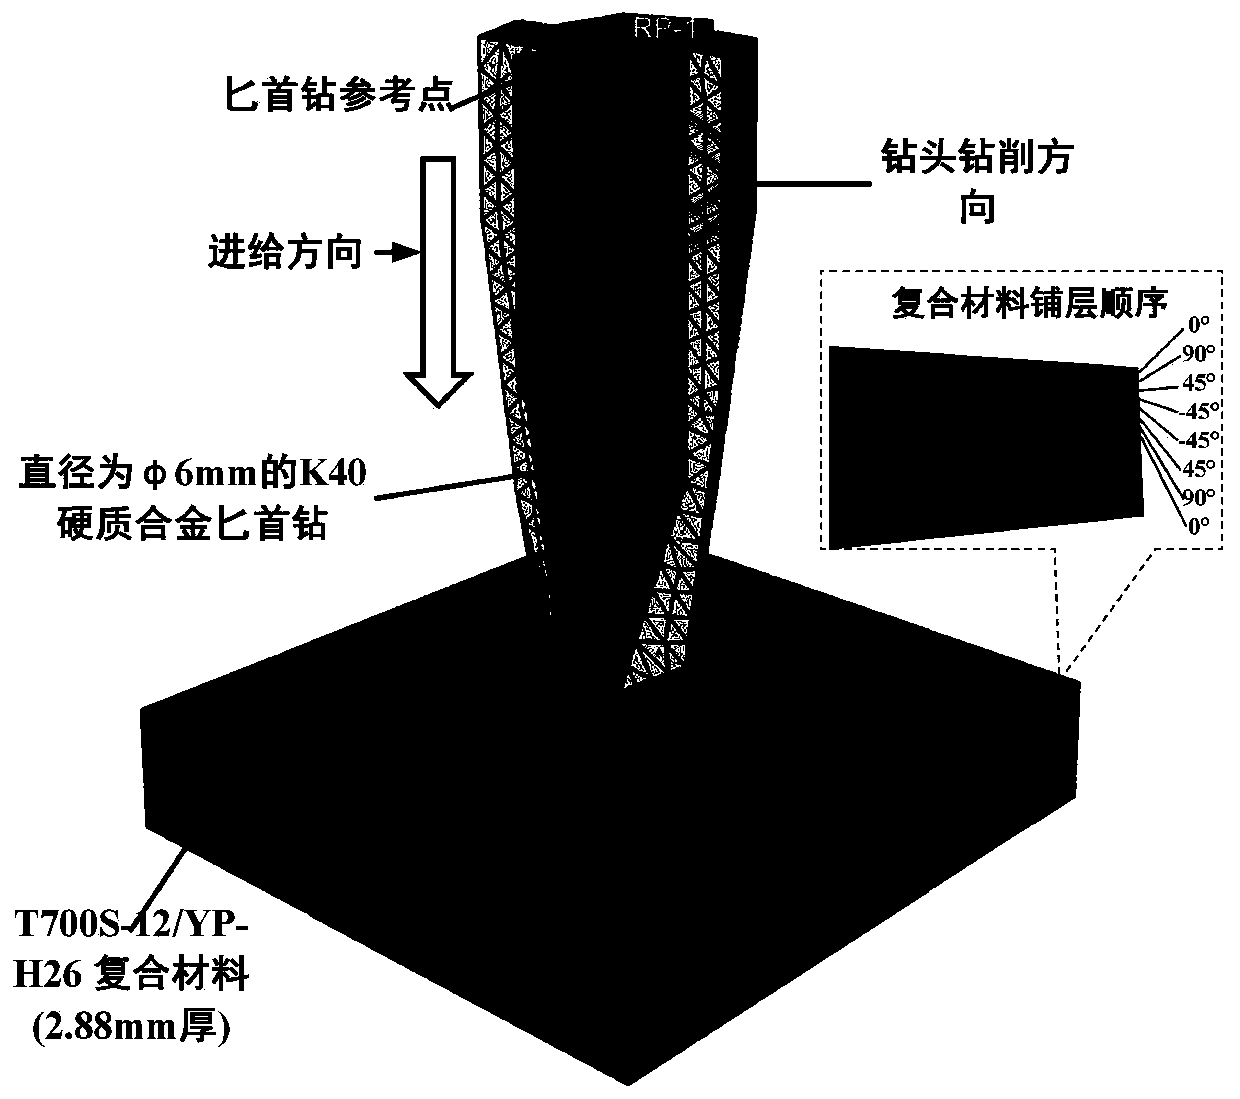 Method for predicting drilling axial force of carbon fiber reinforced composite material